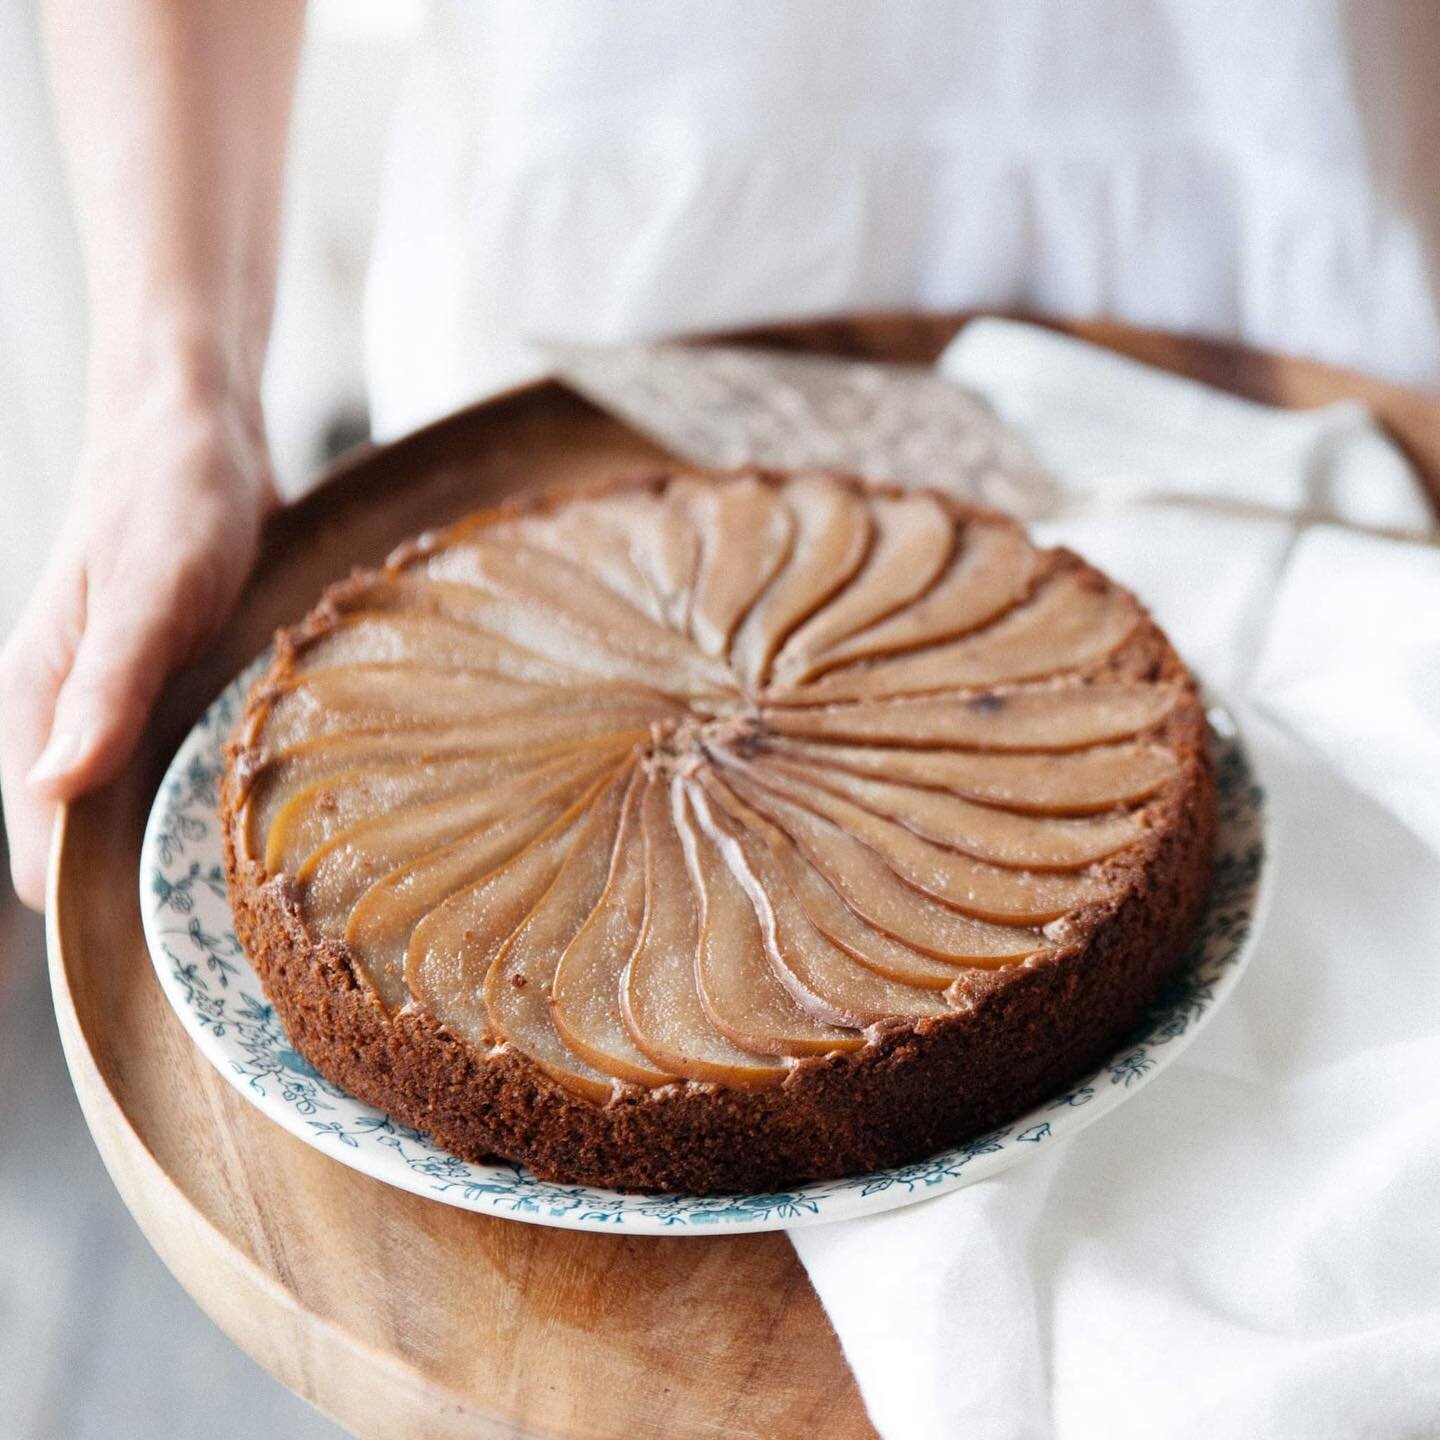 Ad. Pear, Walnut &amp; Cardamom Cake.
I made this delicious, gluten free cake with a collection of ingredients from @countdown_nz and though it sounds a little bit fancy, it is actually super affordable (swipe to see the price of this recipe). I love